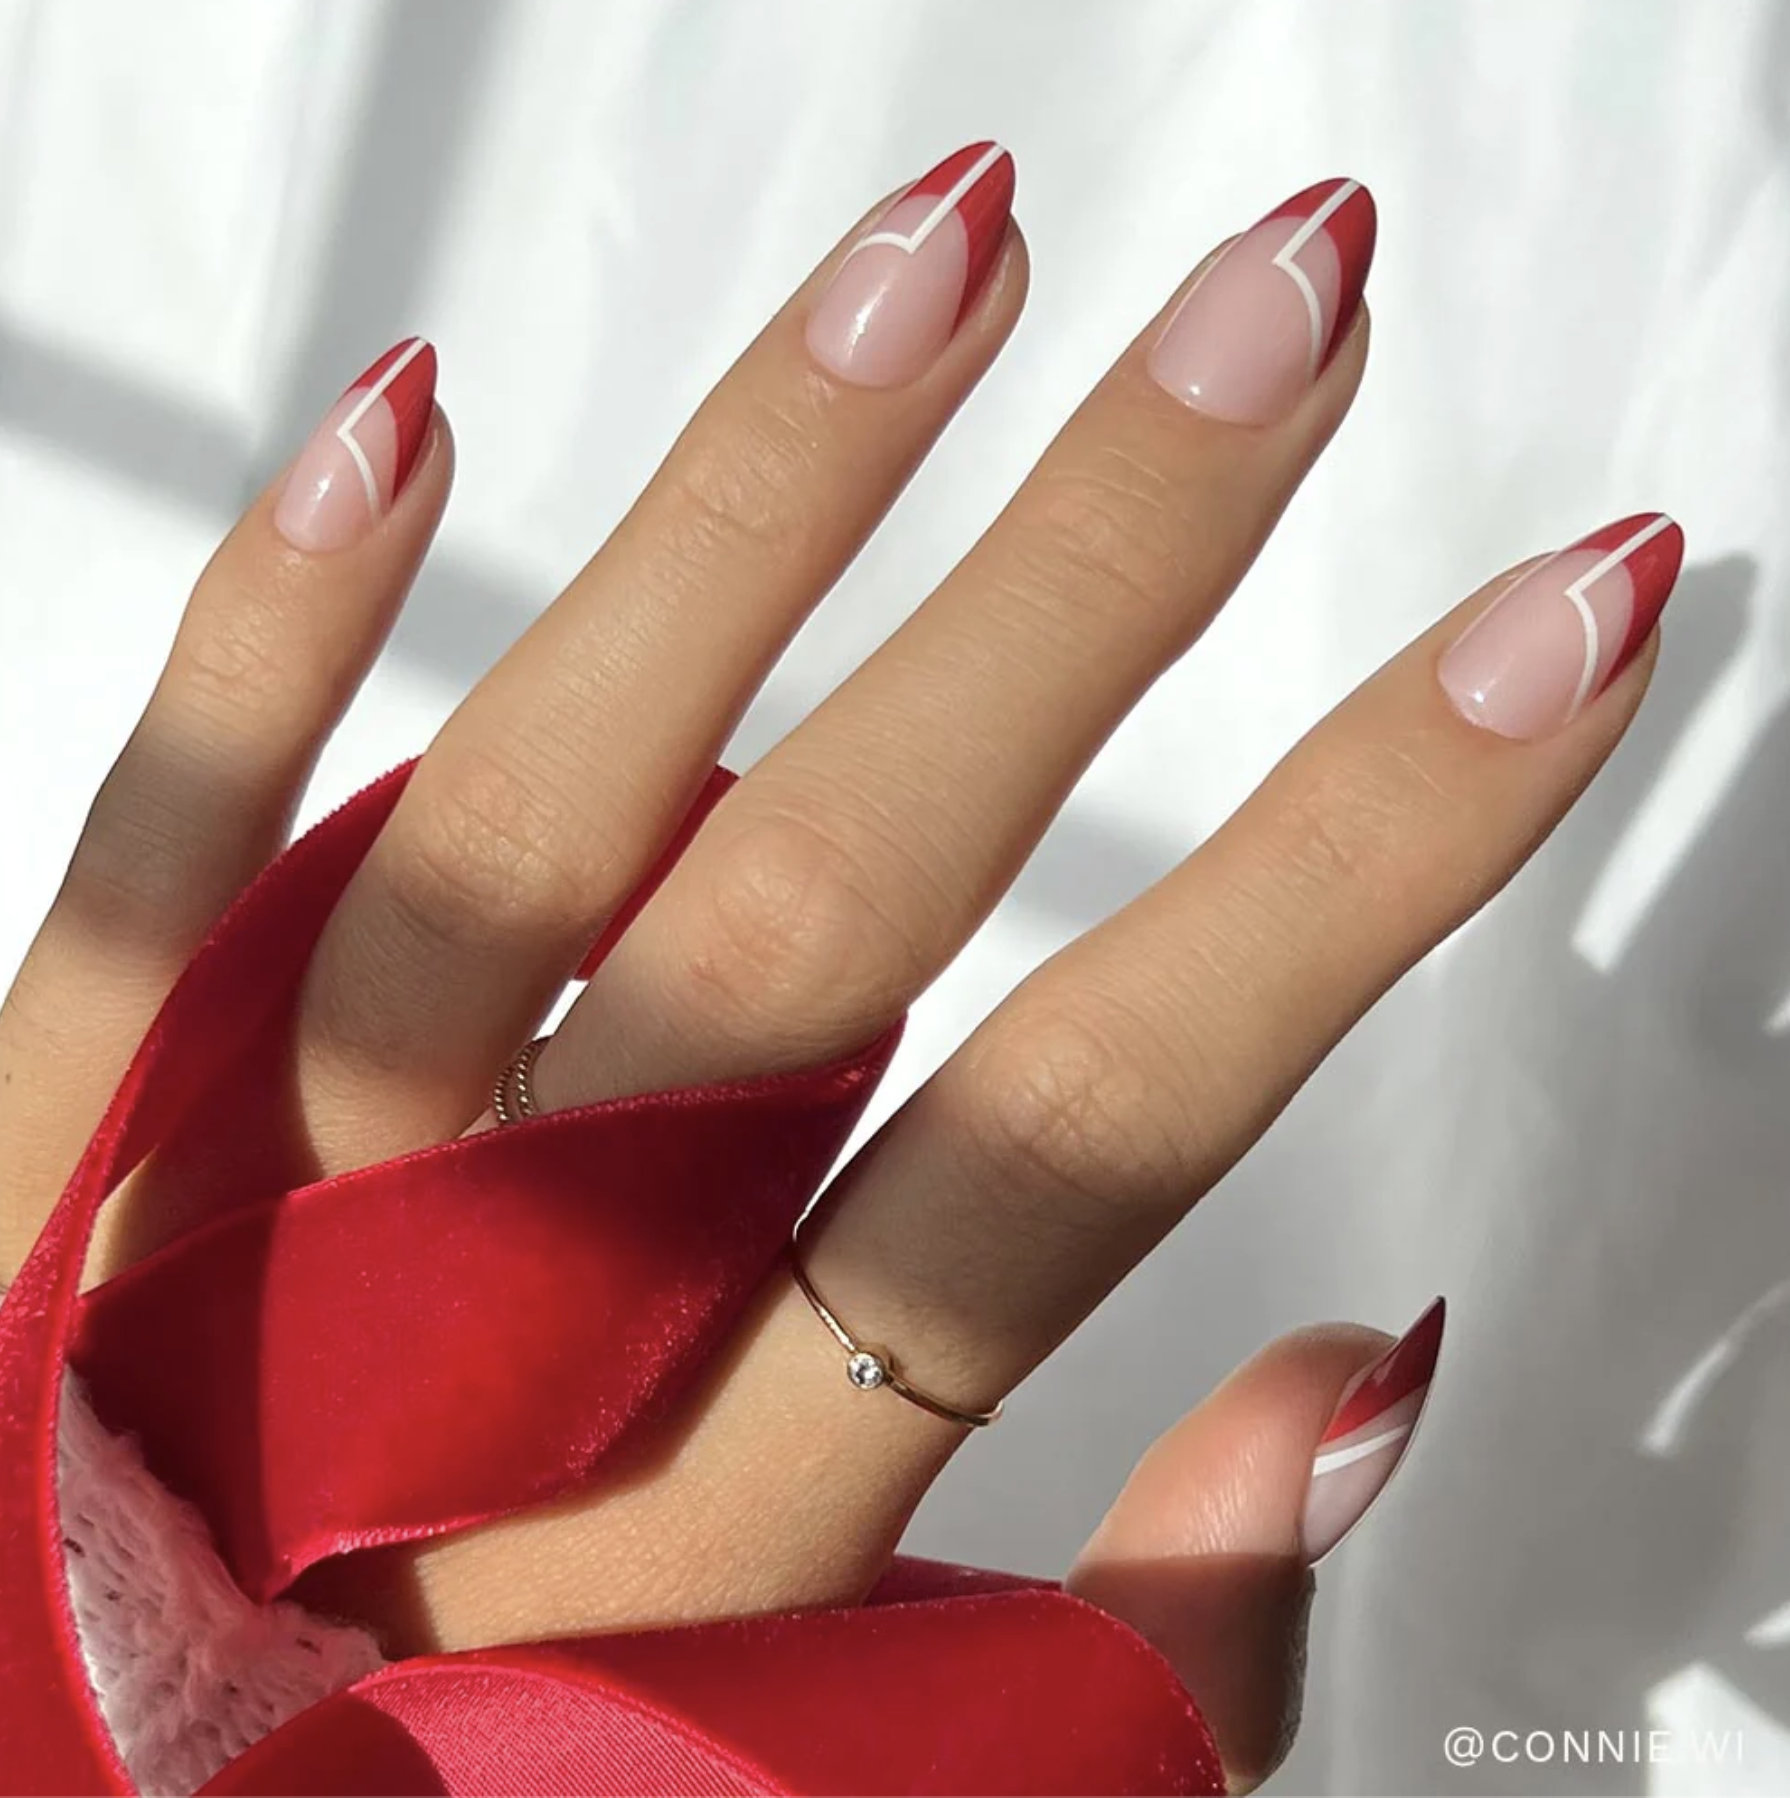 Model wearing red martini nails.